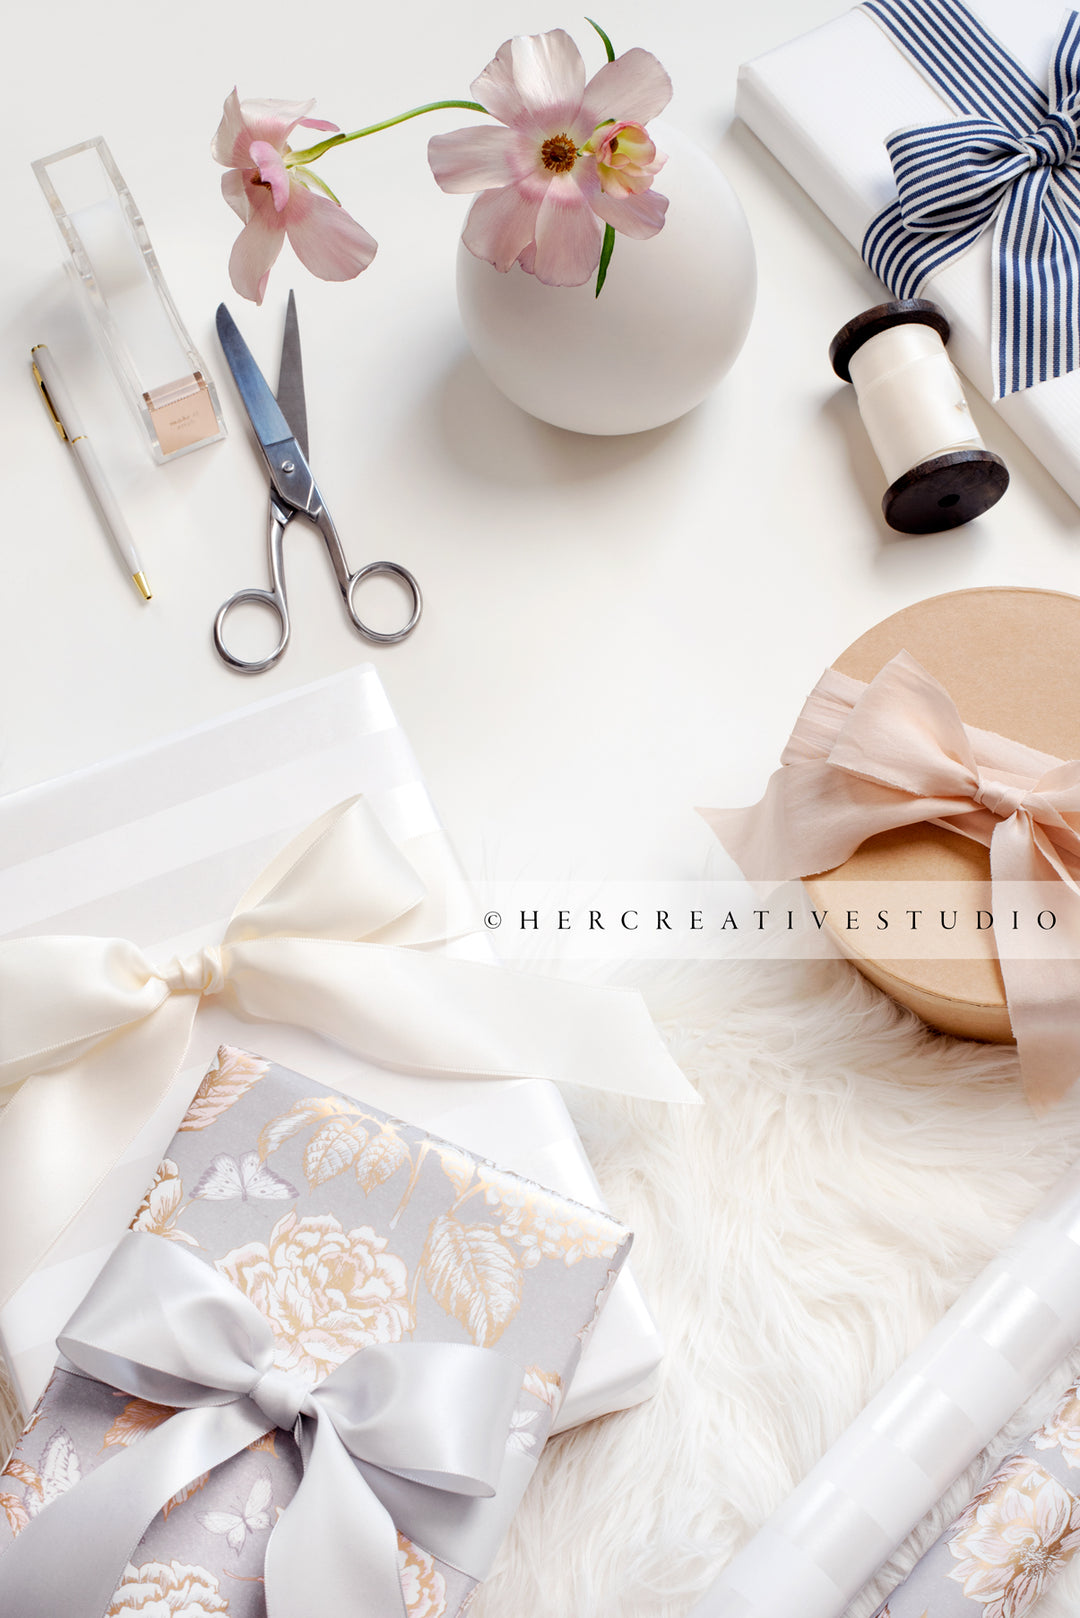 Gifts with Ribbon, Flowers & Scissors. Stock Image